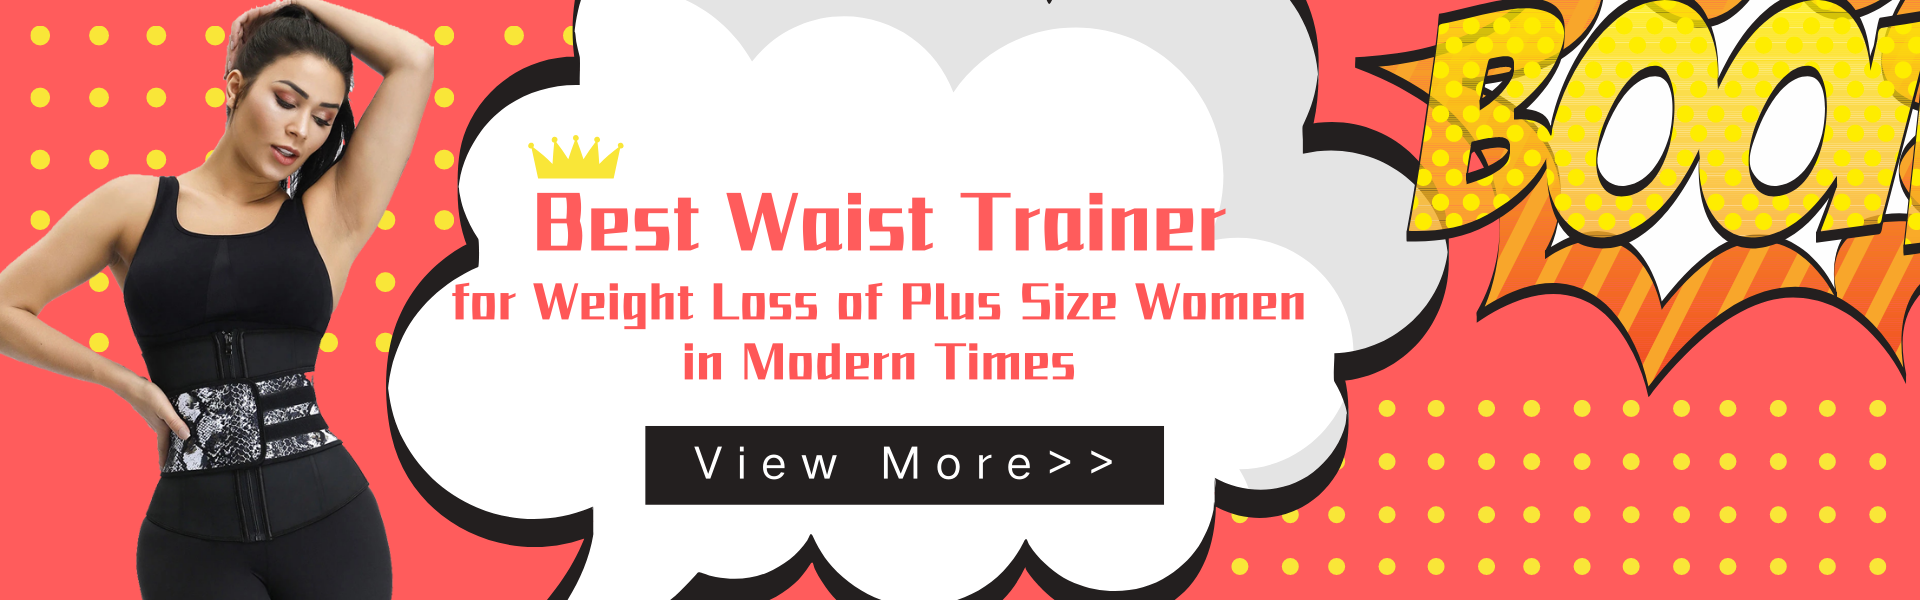 Best Waist Trianer for Weight Loss of Plus Size Women in Modern Times